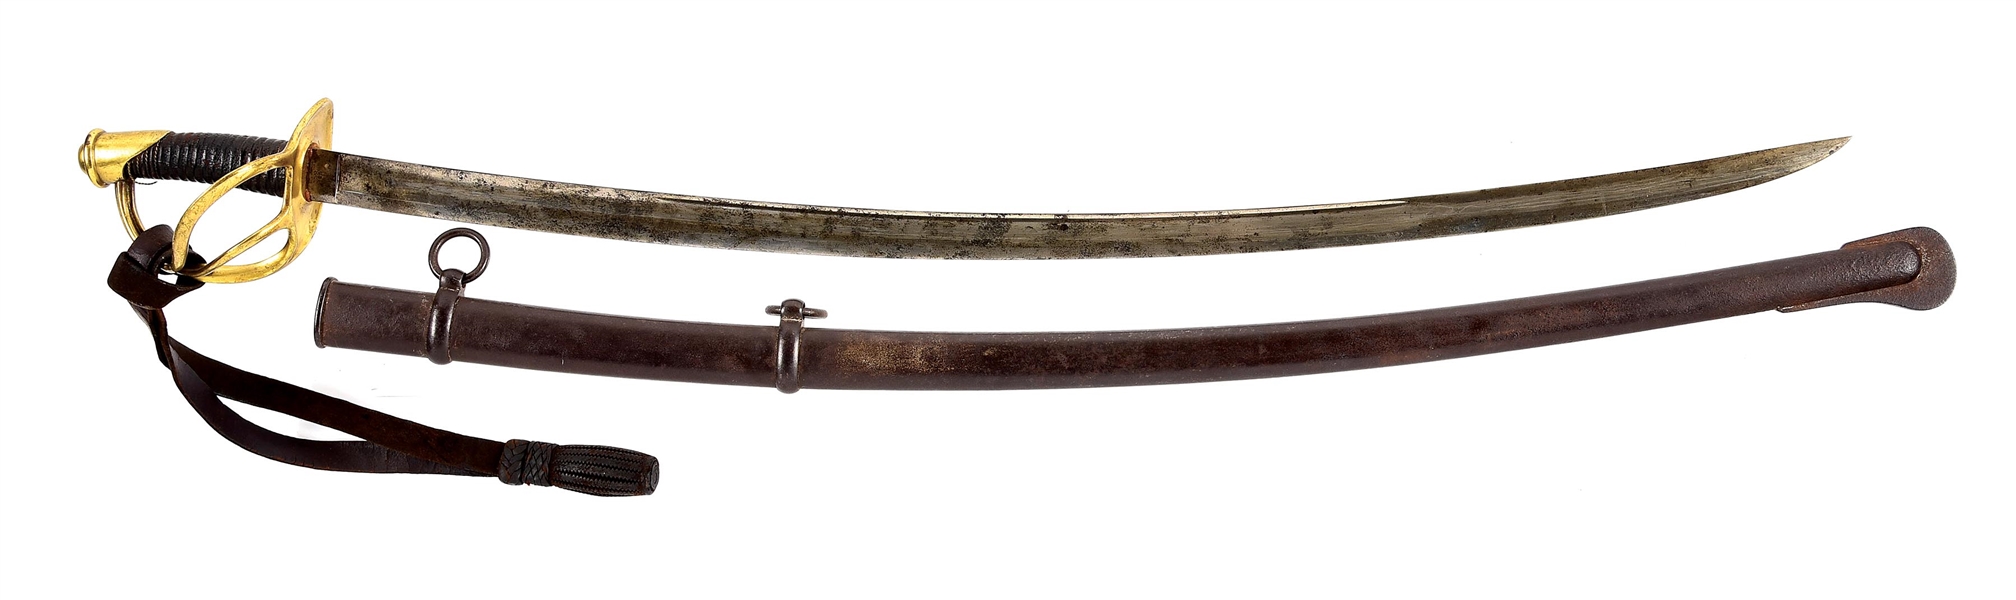 AMES MODEL 1840 HEAVY CAVALRY SABER TAKEN FROM A CONFEDERATE CAVALRYMAN AFTER JEB STUART’S 1862 CHAMBERSBURG, PA RAID